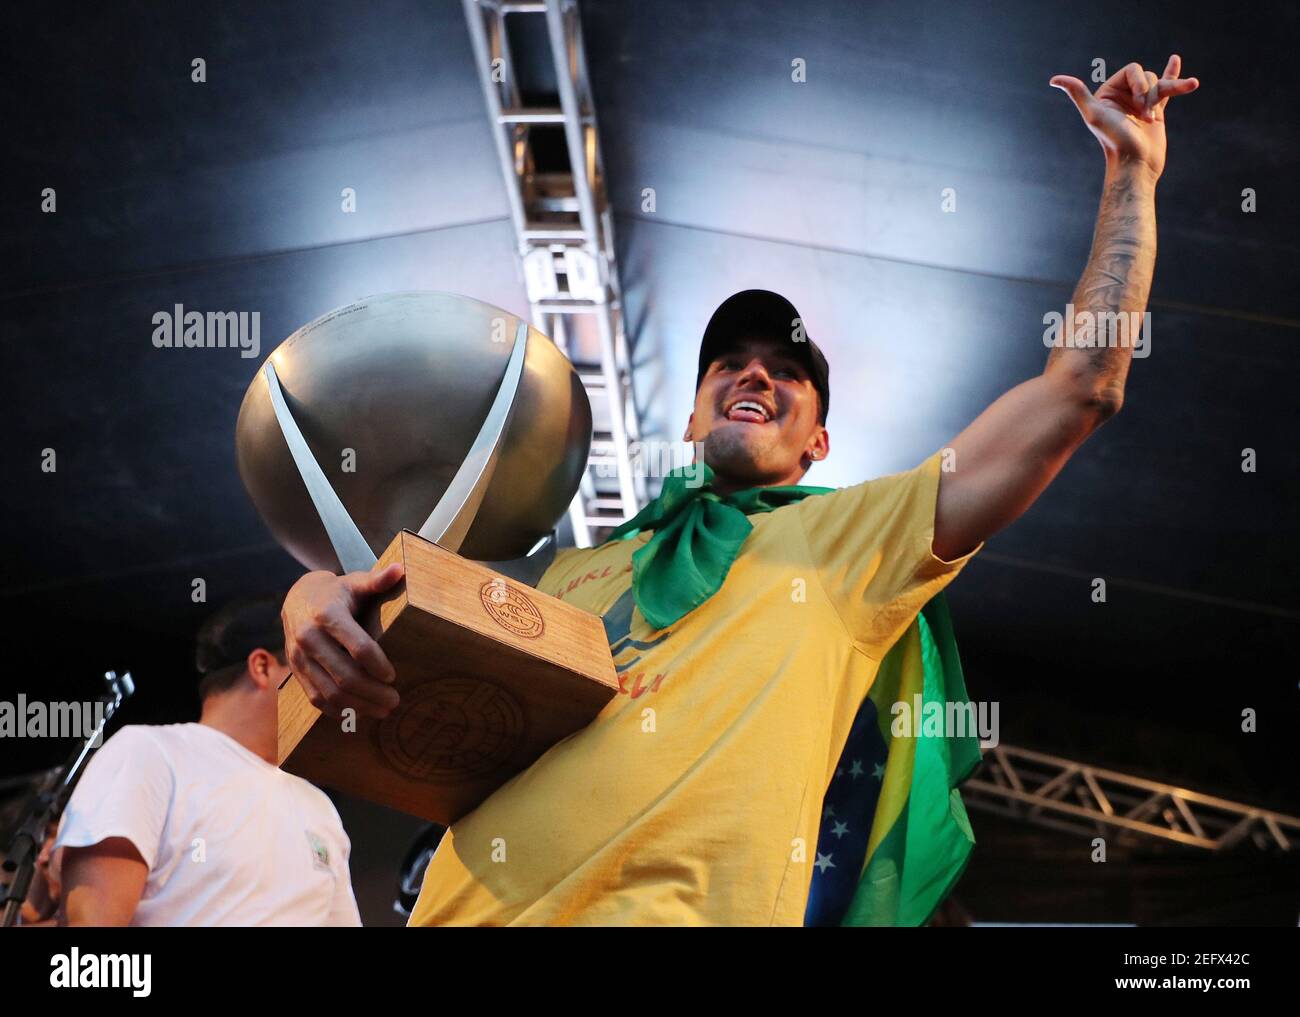 Surfing - Gabriel Medina WSL World Champion arrives in Brazil -  Maresias, Brazil - December 23, 2018    Brazil's Gabriel Medina arrives at his hometown and celebrates with the World Champion trophy   REUTERS/Paulo Whitaker Stock Photo